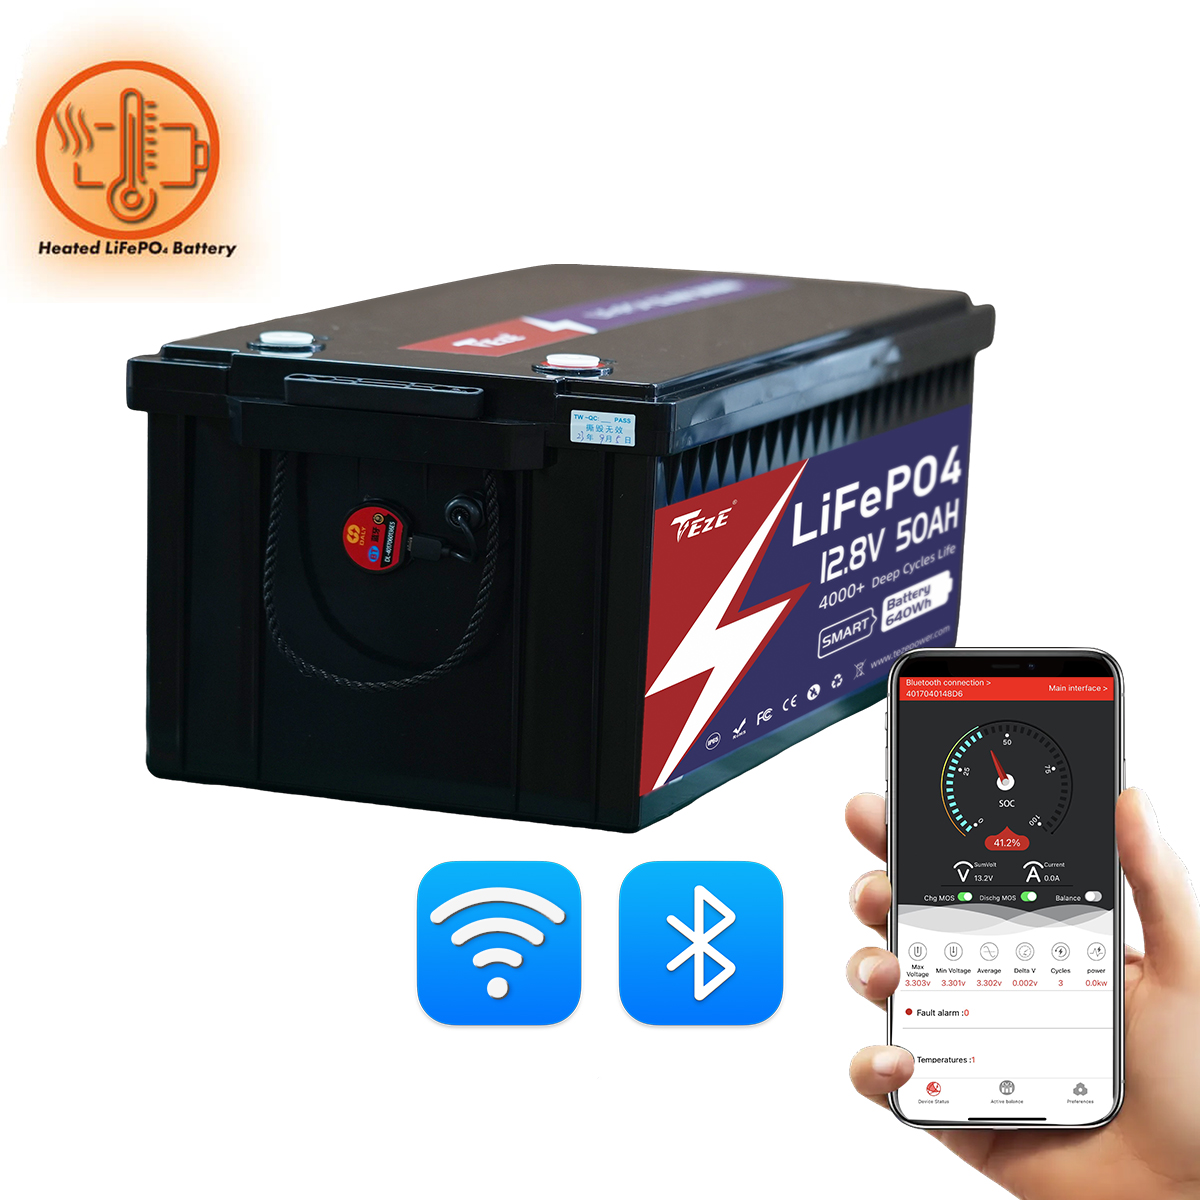 New Add WiFi-TezePower 12V 50Ah LiFePO4 Battery with WIFI and Bluetooth, Self-heating and Active Balancer, Built-in 50A Daly BMS(WIFI External Version)